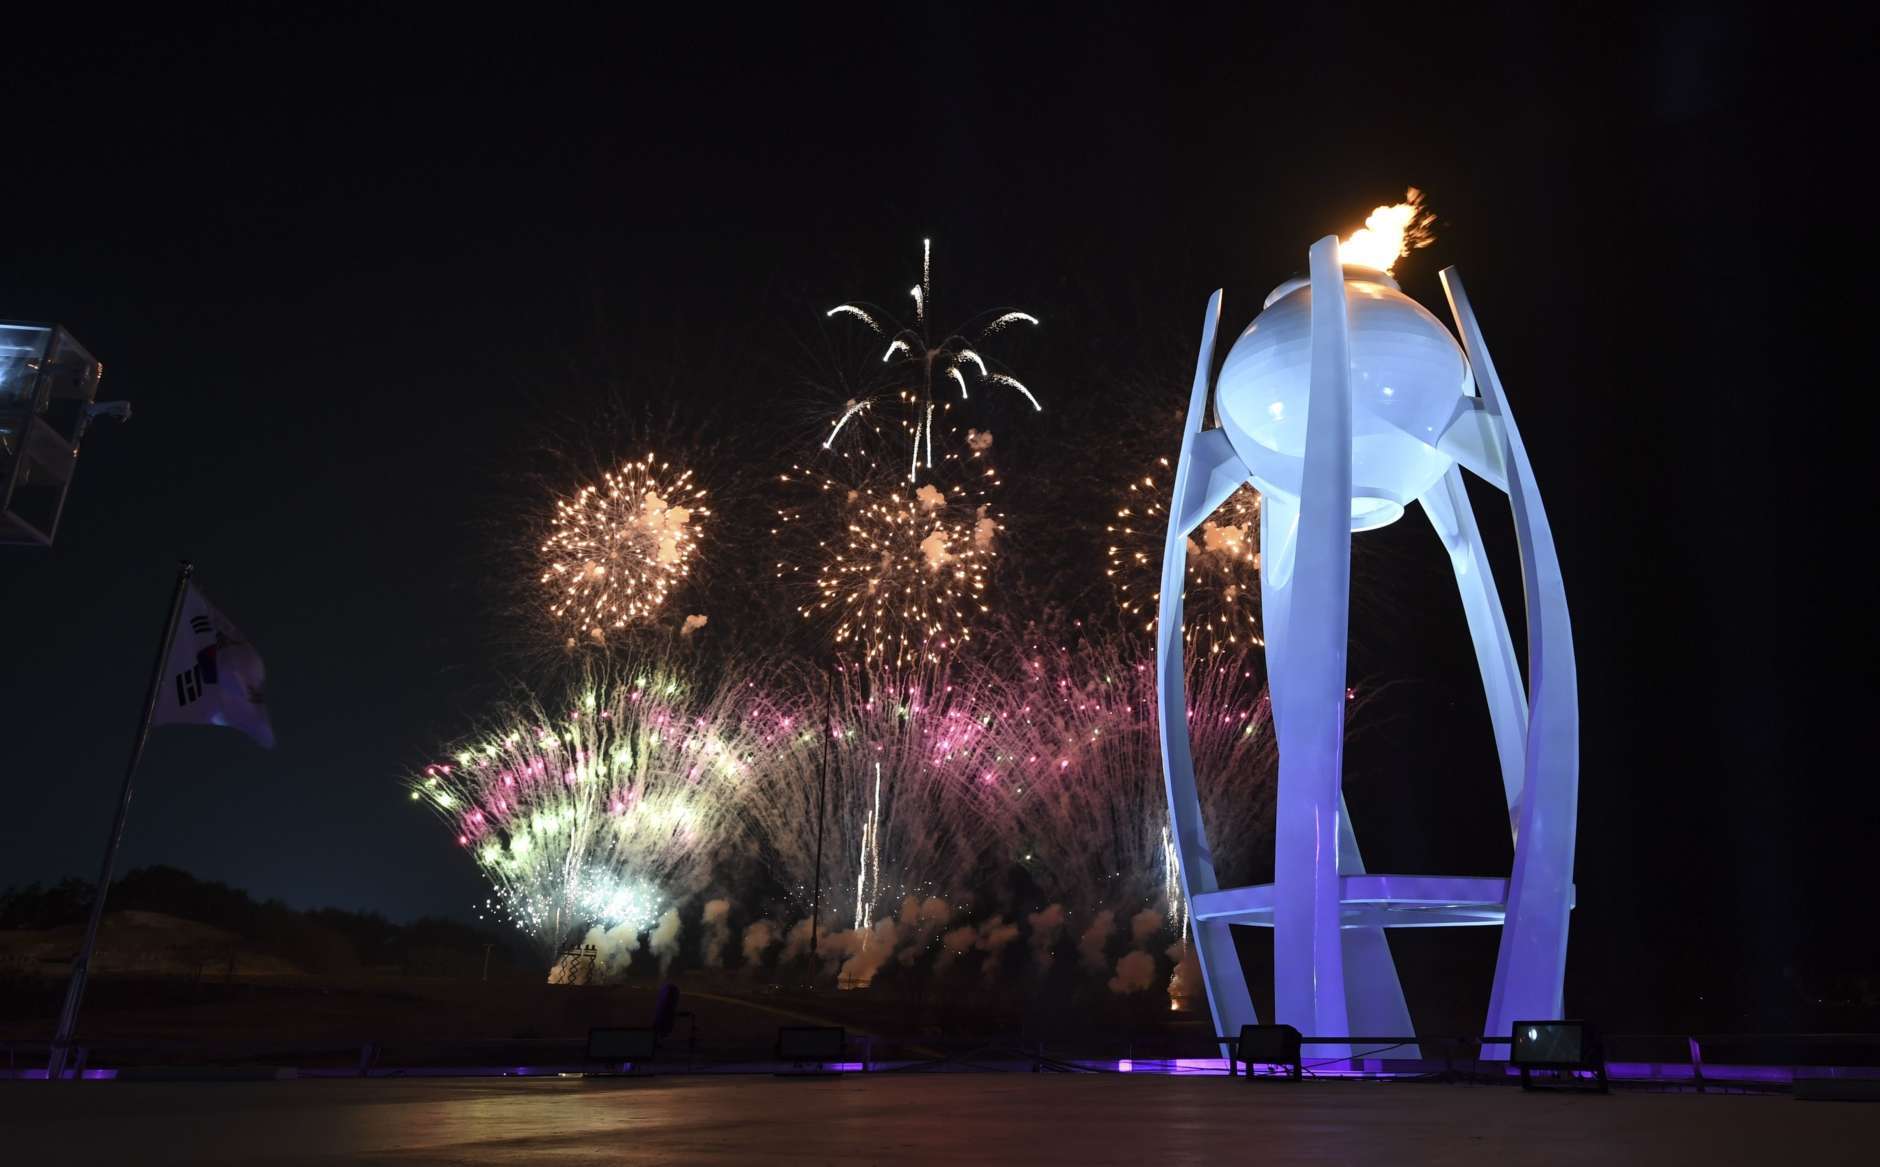 Fireworks explode behind the Olympic cauldron at the start of the closing ceremony of the 2018 Winter Olympics in Pyeongchang, South Korea, Sunday, Feb. 25, 2018. (Christof Stache/Pool Photo via AP)